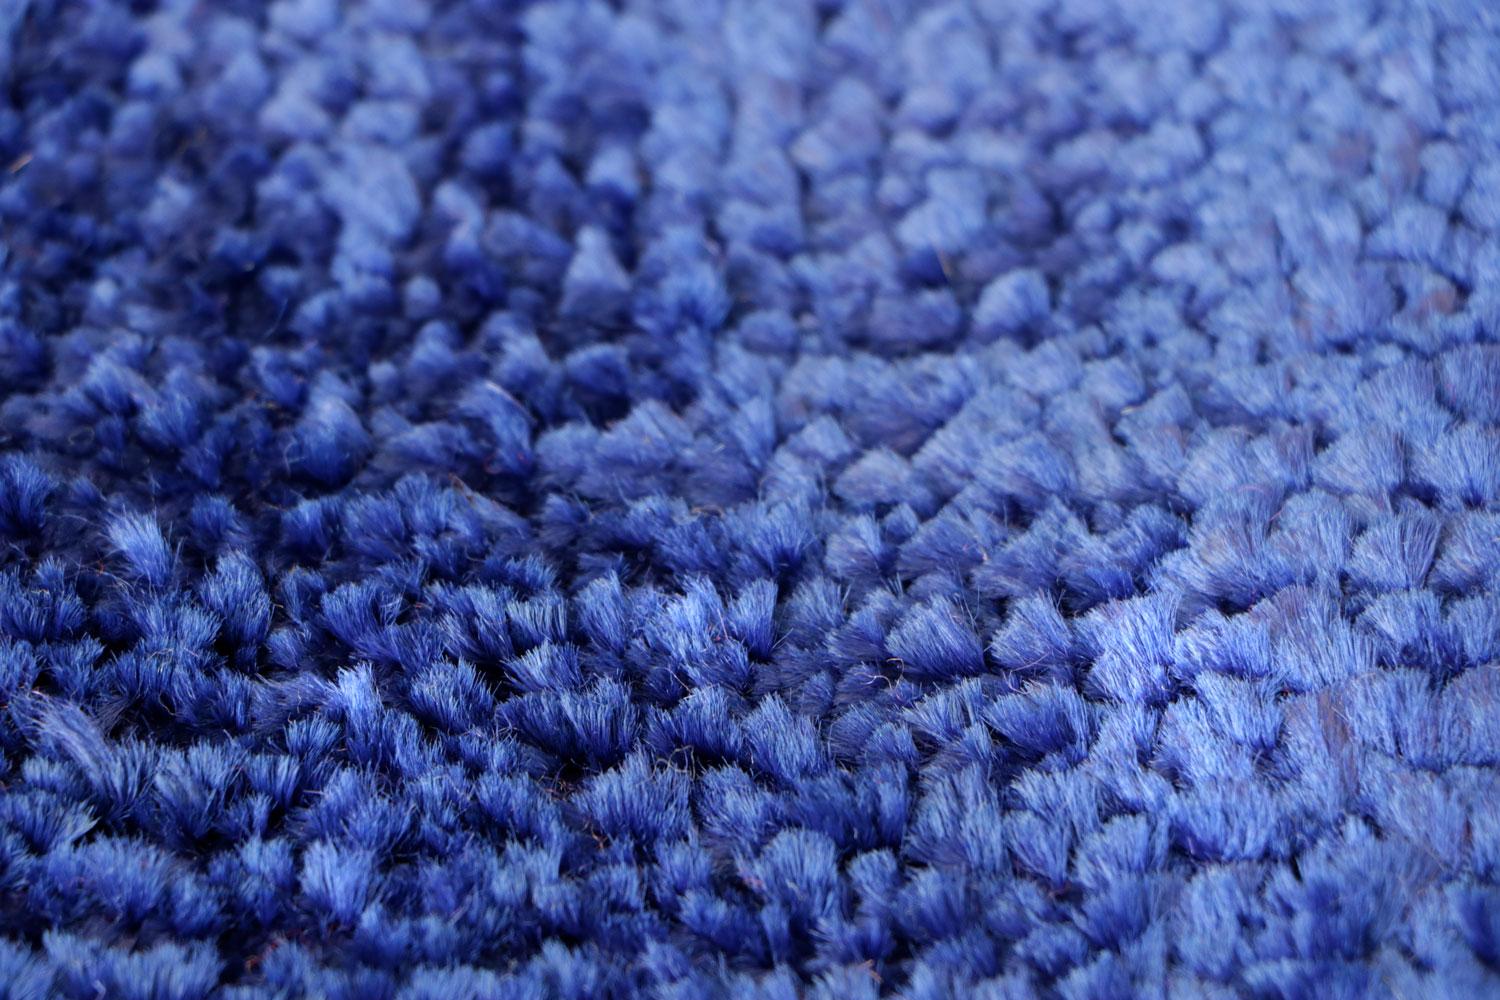 Hand-Woven 21st Century Handwoven Shiny Velvety Blue Rug by Deanna Comellini 170x240 cm For Sale